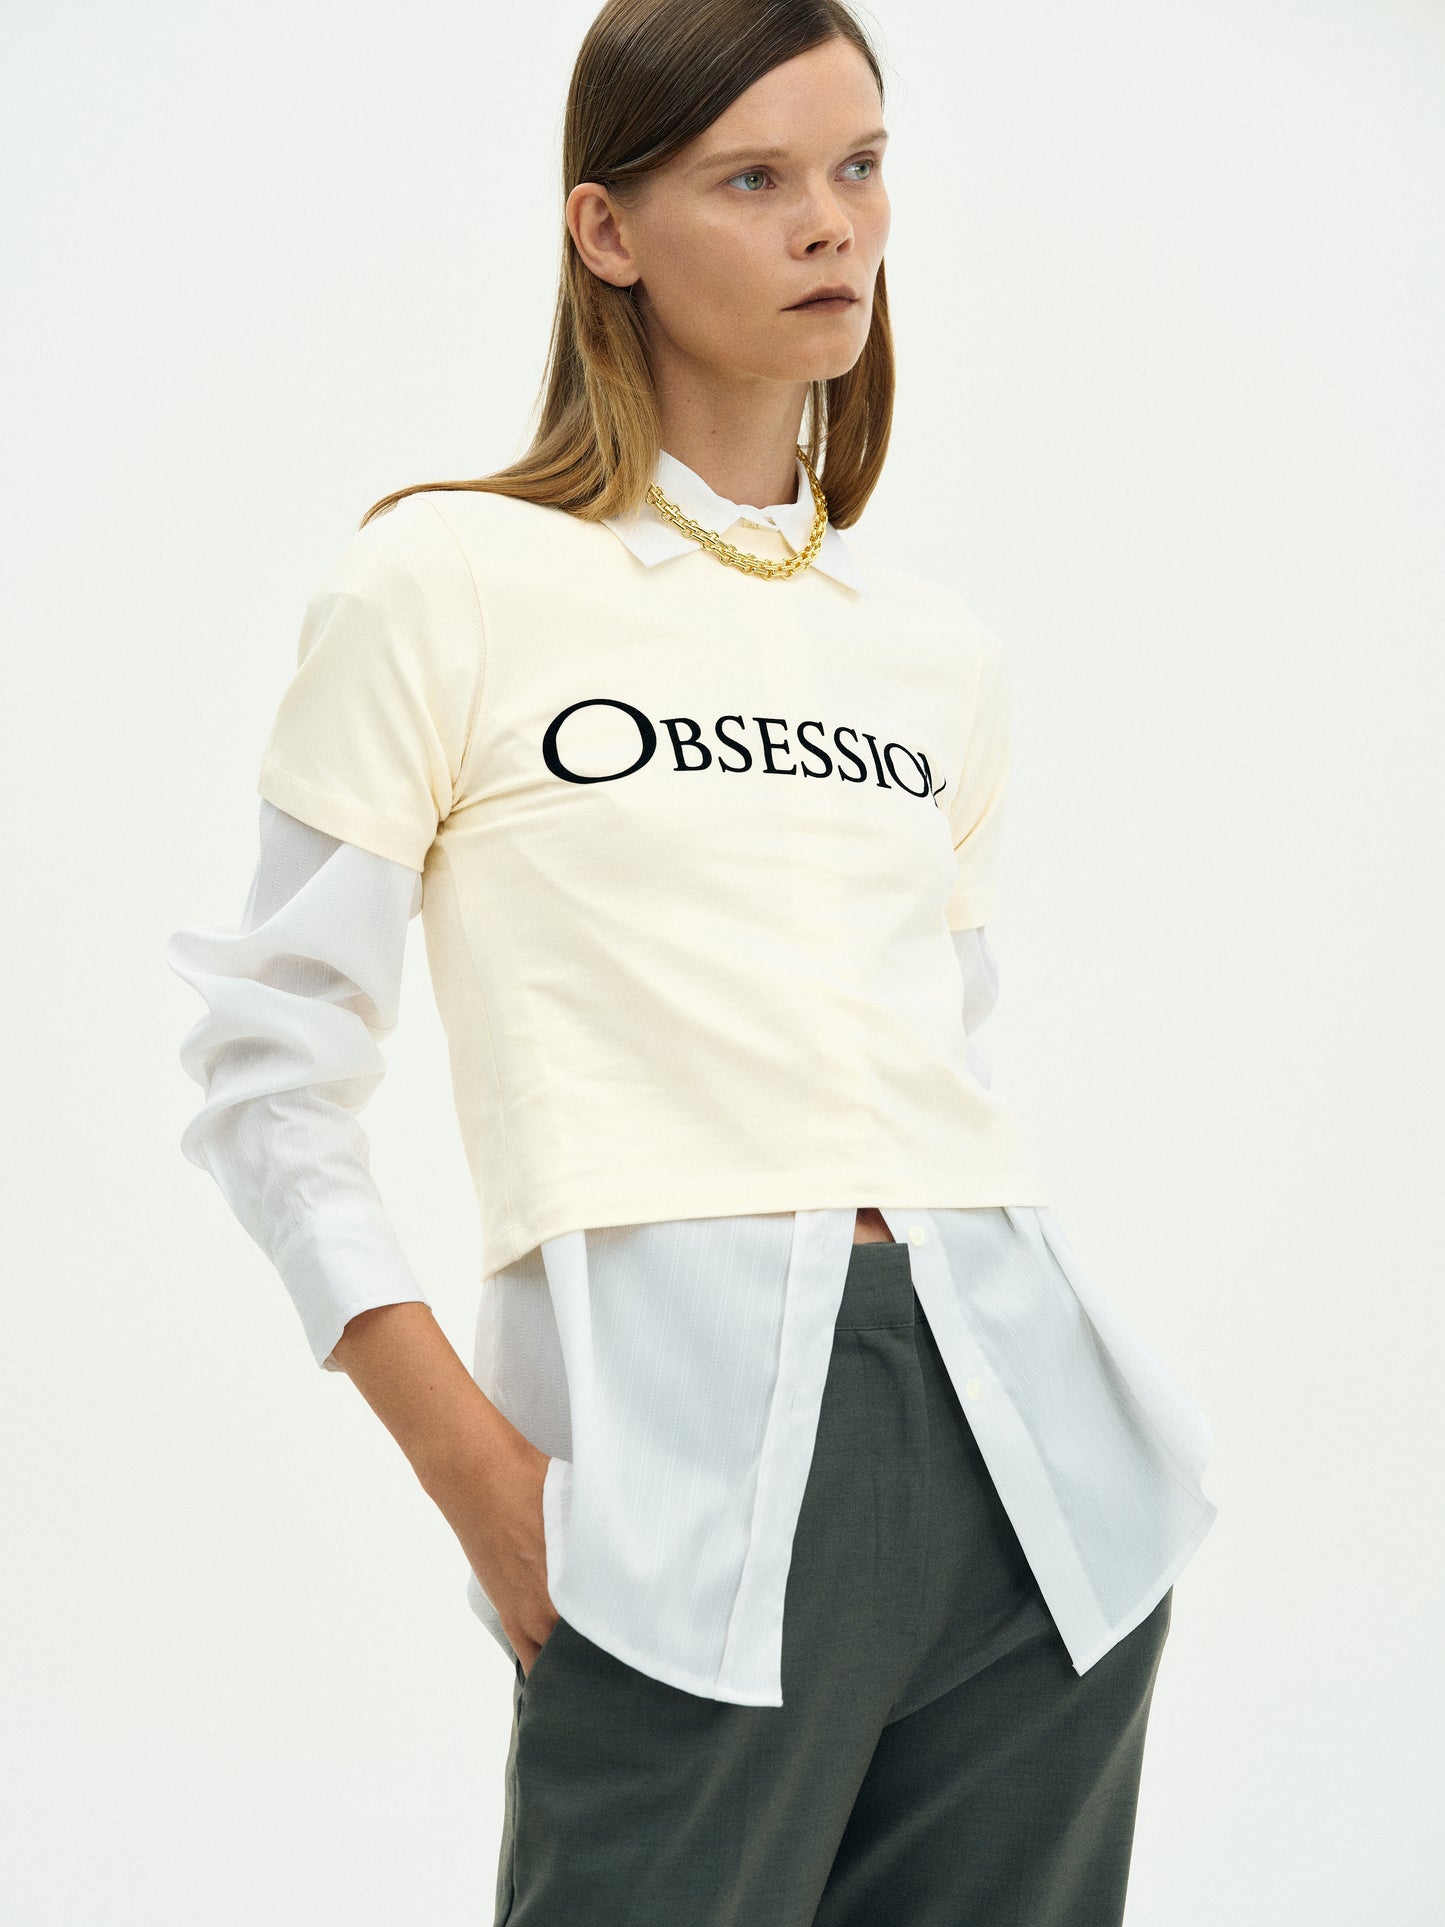 'Obsession' Baby T-shirt, Cream